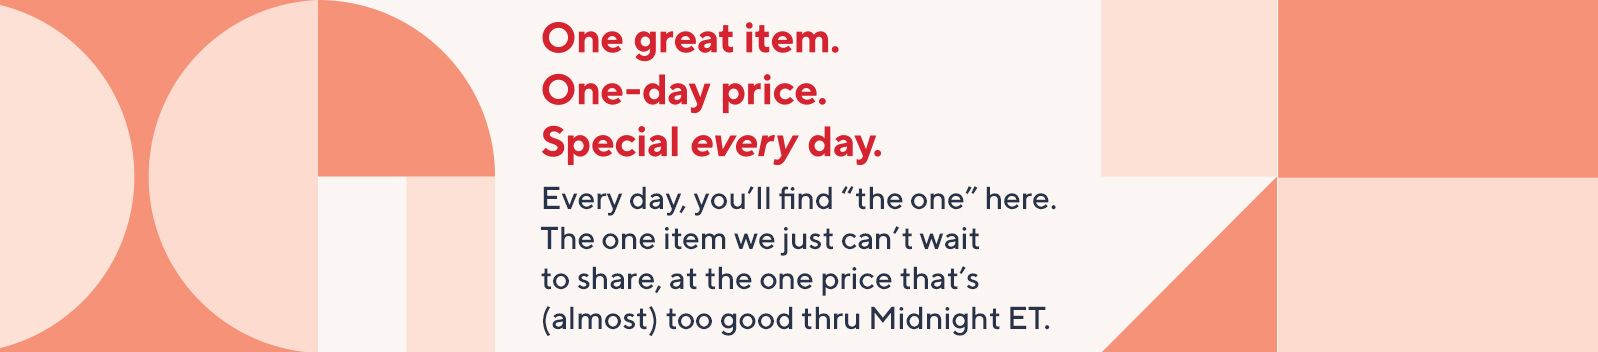 One great item. One-day price. Special every day. Every day, you'll find "the one" here. The one item we just can't wait to share, at the one price that's (almost) too good thru Midnight ET.